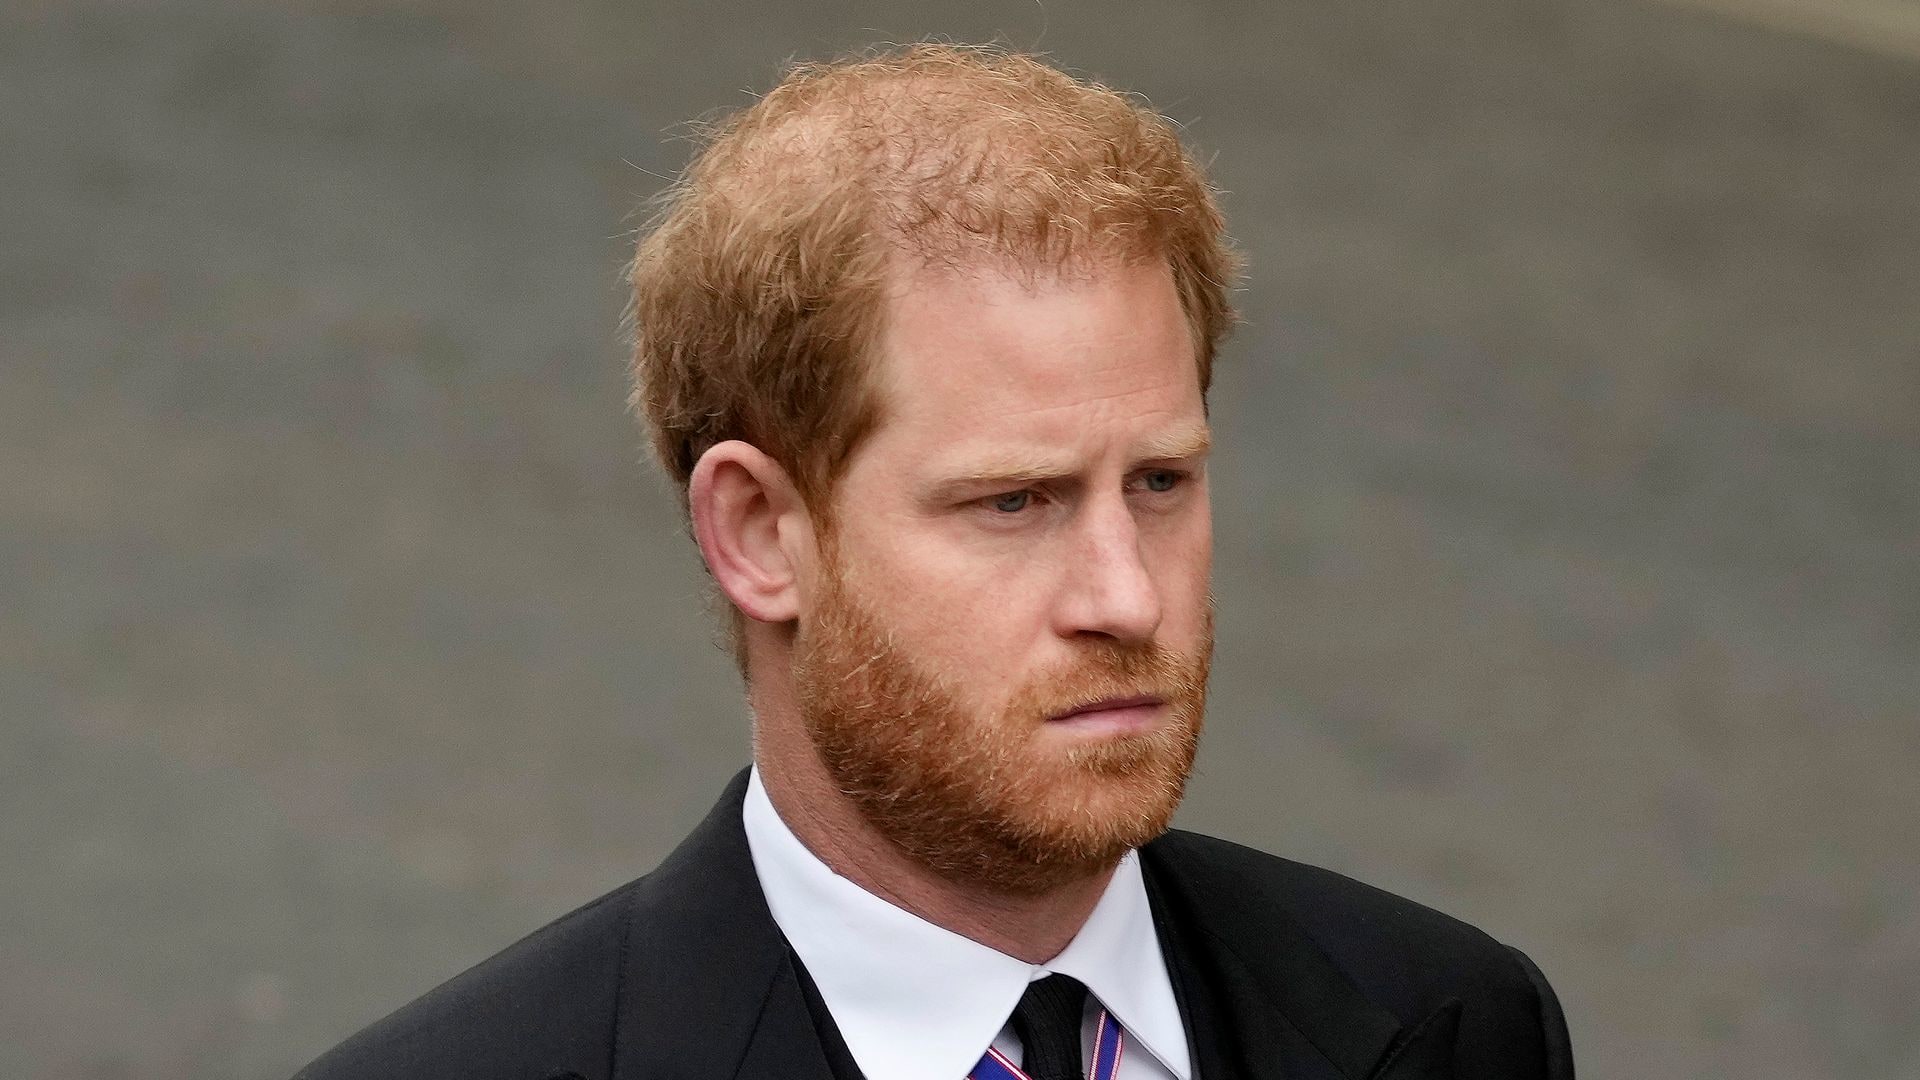 Prince Harry looking sombre in a black suit